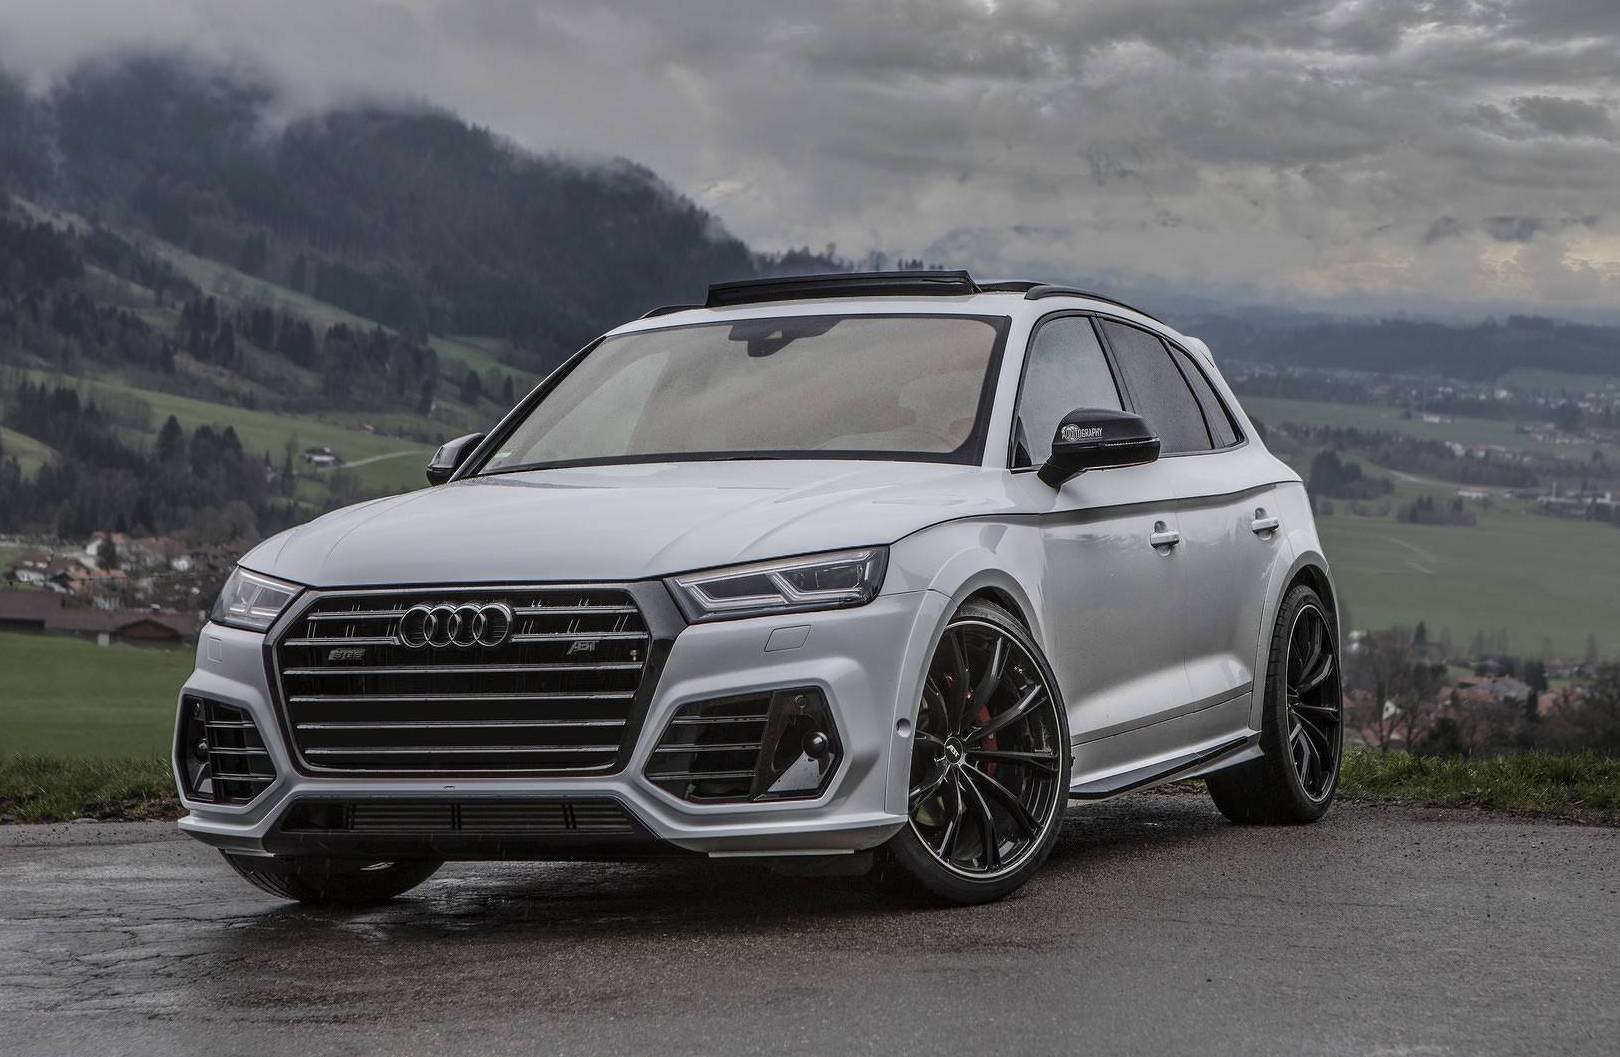 ABT gives the new Audi SQ5 a neat makeover